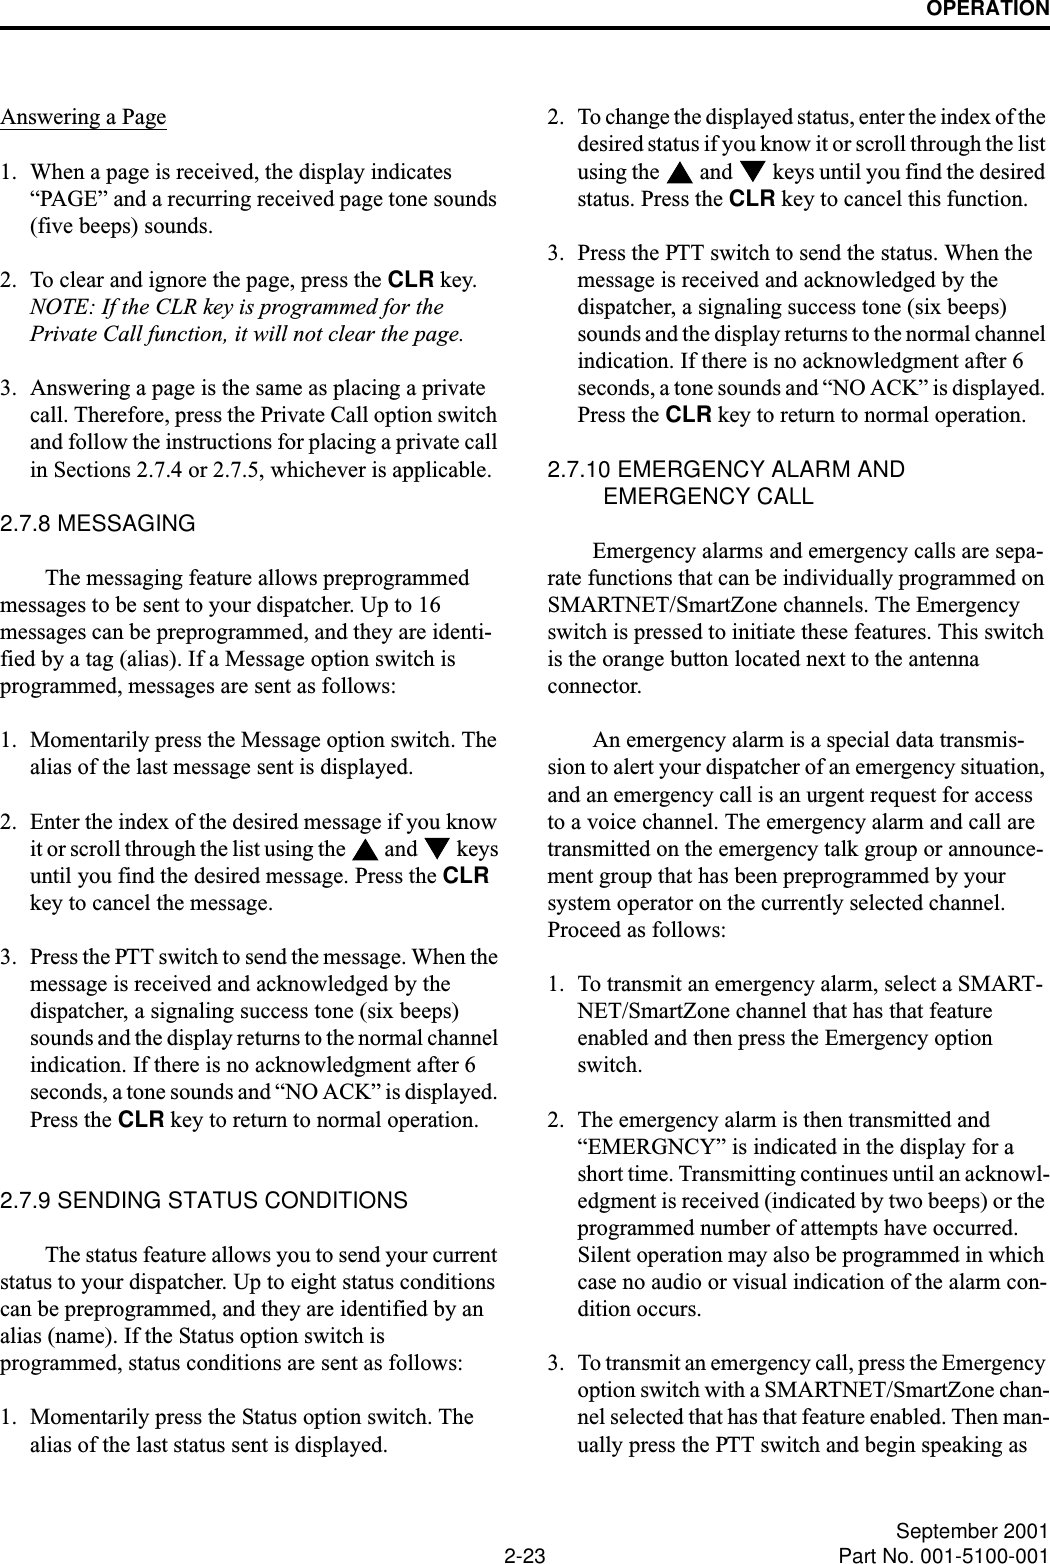 OPERATION2-23 September 2001Part No. 001-5100-001Answering a Page1. When a page is received, the display indicates “PAGE” and a recurring received page tone sounds (five beeps) sounds. 2. To clear and ignore the page, press the CLR key. NOTE: If the CLR key is programmed for the Private Call function, it will not clear the page.3. Answering a page is the same as placing a private call. Therefore, press the Private Call option switch and follow the instructions for placing a private call in Sections 2.7.4 or 2.7.5, whichever is applicable.2.7.8 MESSAGINGThe messaging feature allows preprogrammed messages to be sent to your dispatcher. Up to 16 messages can be preprogrammed, and they are identi-fied by a tag (alias). If a Message option switch is programmed, messages are sent as follows:1. Momentarily press the Message option switch. The alias of the last message sent is displayed.2. Enter the index of the desired message if you know it or scroll through the list using the   and   keys until you find the desired message. Press the CLR key to cancel the message.3. Press the PTT switch to send the message. When the message is received and acknowledged by the dispatcher, a signaling success tone (six beeps) sounds and the display returns to the normal channel indication. If there is no acknowledgment after 6 seconds, a tone sounds and “NO ACK” is displayed. Press the CLR key to return to normal operation.2.7.9 SENDING STATUS CONDITIONSThe status feature allows you to send your current status to your dispatcher. Up to eight status conditions can be preprogrammed, and they are identified by an alias (name). If the Status option switch is programmed, status conditions are sent as follows:1. Momentarily press the Status option switch. The alias of the last status sent is displayed.2. To change the displayed status, enter the index of the desired status if you know it or scroll through the list using the   and   keys until you find the desired status. Press the CLR key to cancel this function. 3. Press the PTT switch to send the status. When the message is received and acknowledged by the dispatcher, a signaling success tone (six beeps) sounds and the display returns to the normal channel indication. If there is no acknowledgment after 6 seconds, a tone sounds and “NO ACK” is displayed. Press the CLR key to return to normal operation.2.7.10 EMERGENCY ALARM AND EMERGENCY CALLEmergency alarms and emergency calls are sepa-rate functions that can be individually programmed on SMARTNET/SmartZone channels. The Emergency switch is pressed to initiate these features. This switch is the orange button located next to the antenna connector.An emergency alarm is a special data transmis-sion to alert your dispatcher of an emergency situation, and an emergency call is an urgent request for access to a voice channel. The emergency alarm and call are transmitted on the emergency talk group or announce-ment group that has been preprogrammed by your system operator on the currently selected channel. Proceed as follows:1. To transmit an emergency alarm, select a SMART-NET/SmartZone channel that has that feature enabled and then press the Emergency option switch.2. The emergency alarm is then transmitted and “EMERGNCY” is indicated in the display for a short time. Transmitting continues until an acknowl-edgment is received (indicated by two beeps) or the programmed number of attempts have occurred. Silent operation may also be programmed in which case no audio or visual indication of the alarm con-dition occurs.3. To transmit an emergency call, press the Emergency option switch with a SMARTNET/SmartZone chan-nel selected that has that feature enabled. Then man-ually press the PTT switch and begin speaking as 